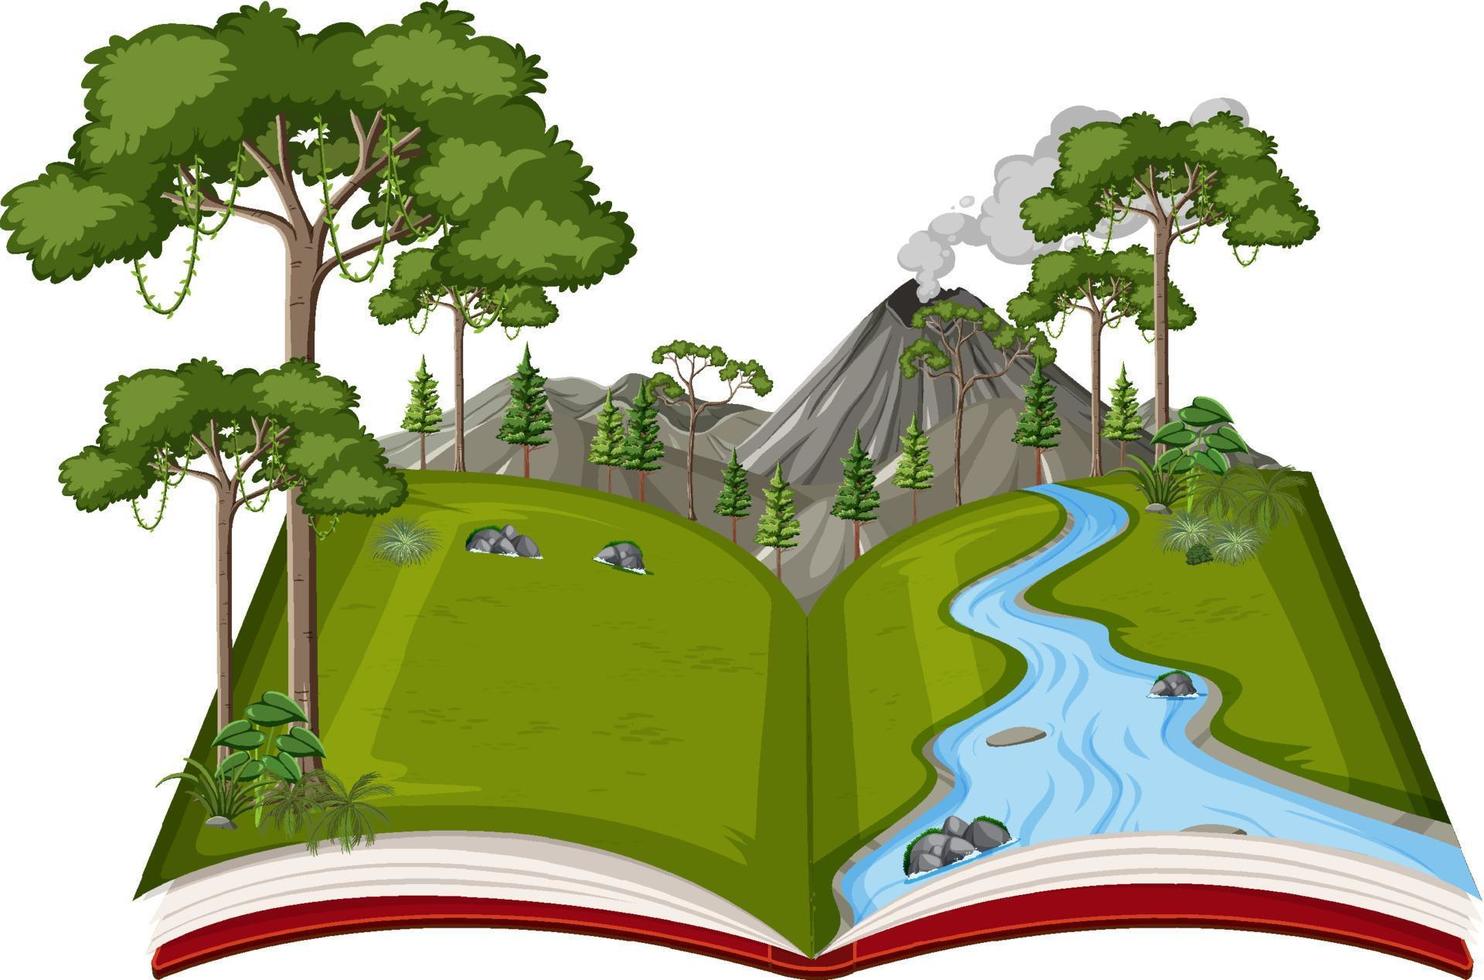 Book with scene of river run through woods vector